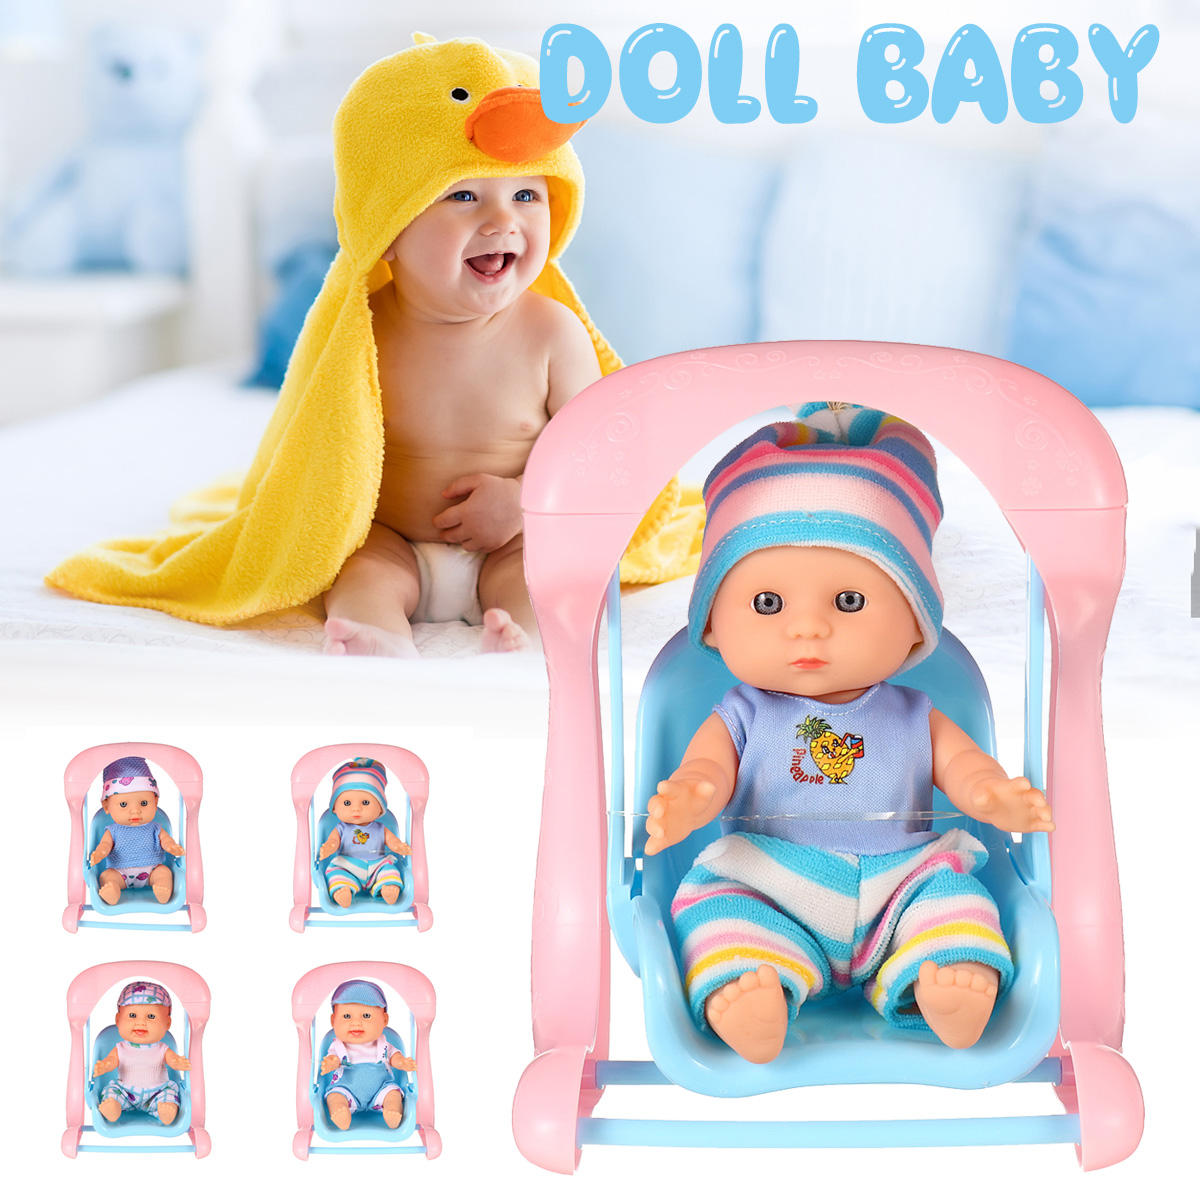 Simulation-Baby-3D-Creative-Cute-Doll-Play-House-Toy-Doll-Vinyl-Doll-Gift-1818655-2